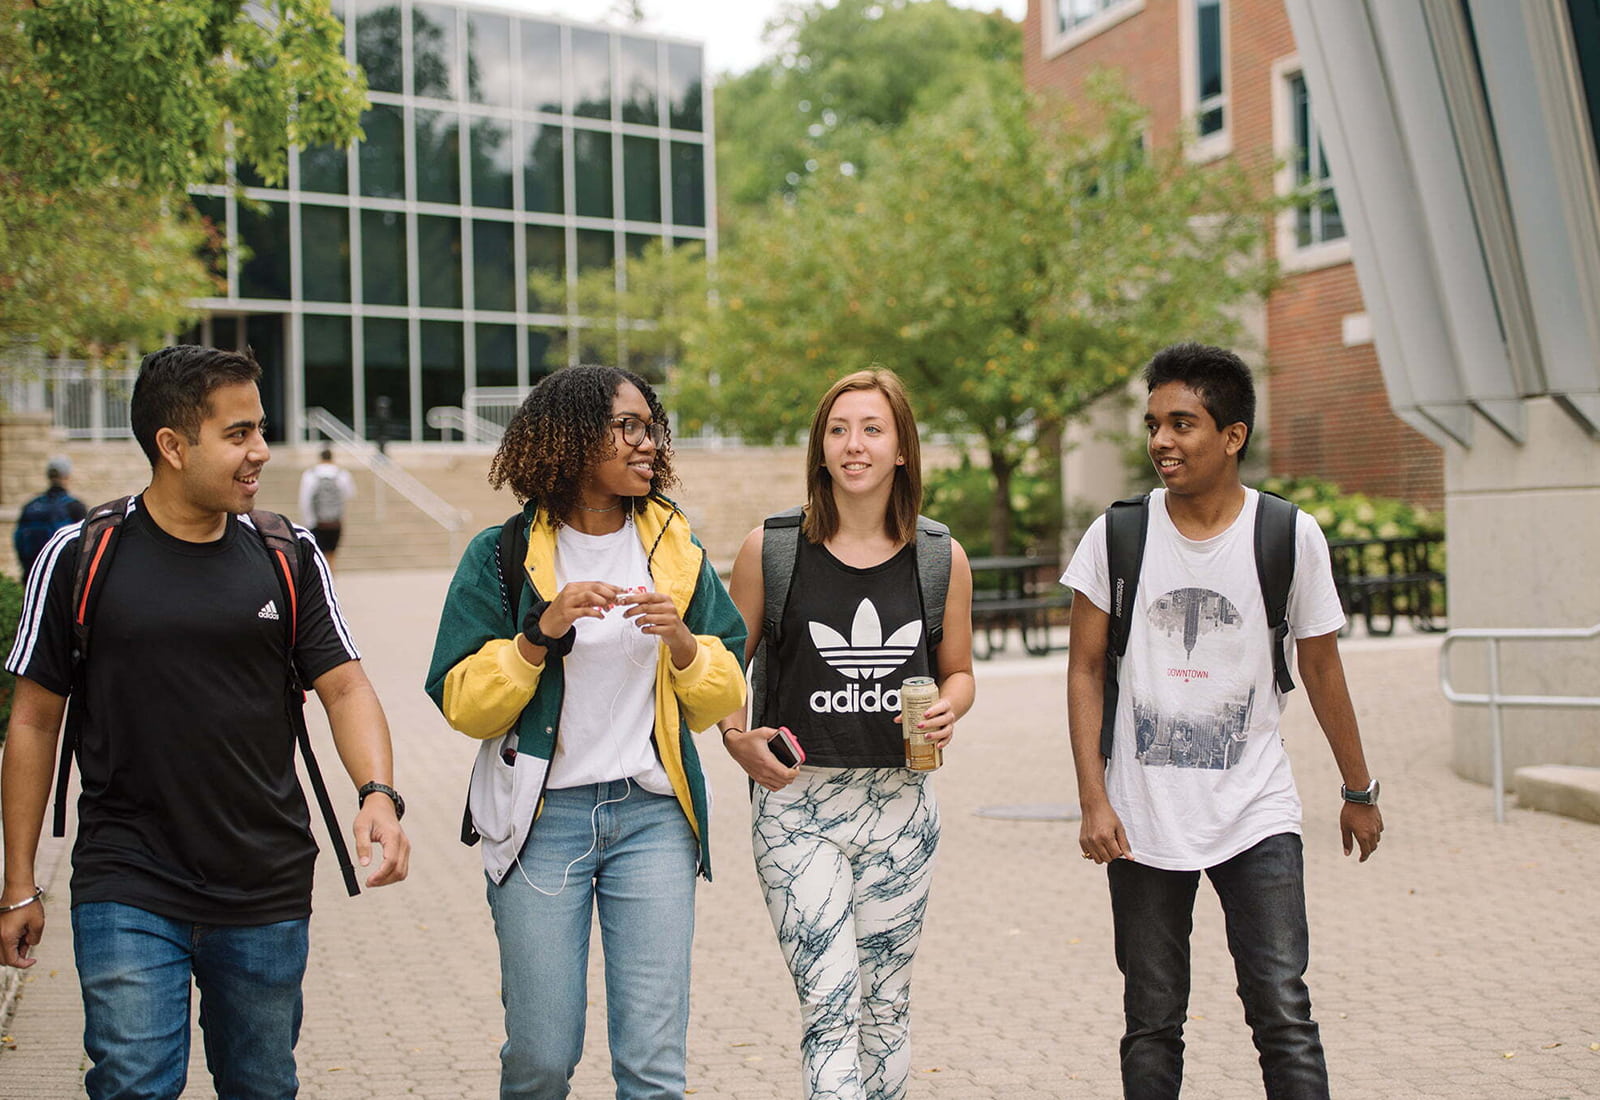 Students on the campus of University of Dayton, a member of the American Talent Initiative program.